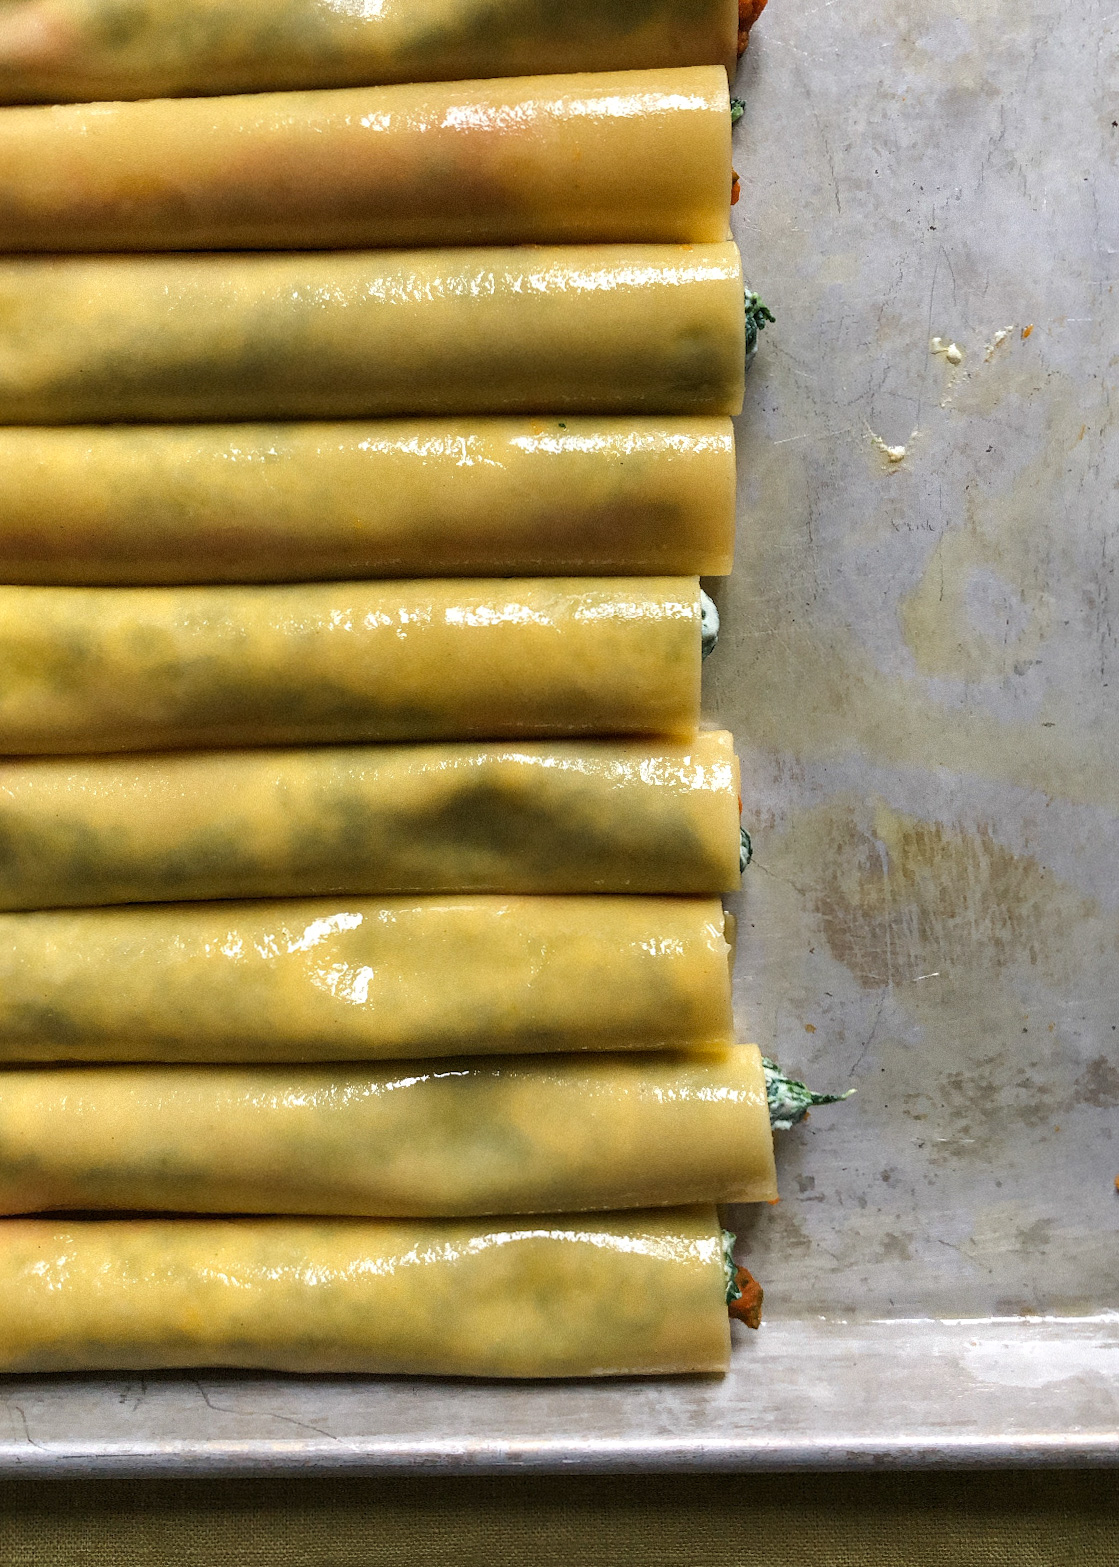 Gluten free filled cannelloni tubes